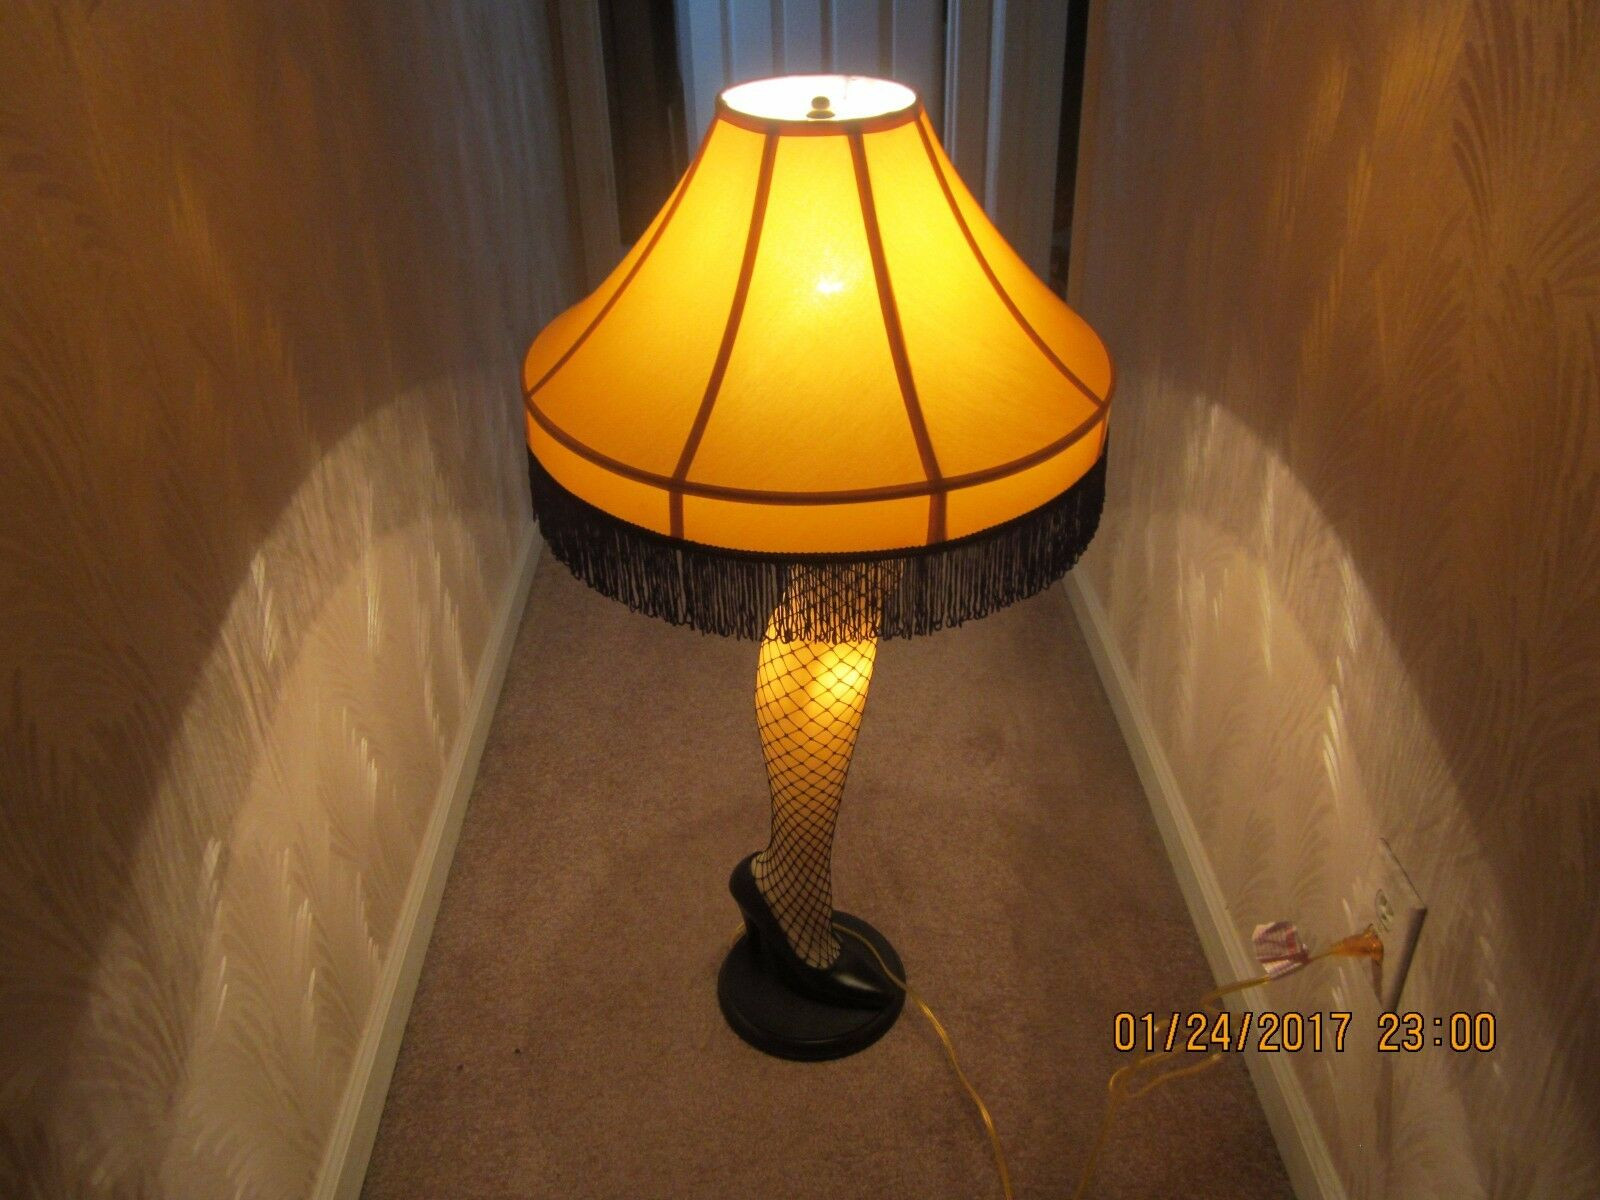 Christmas Story Lamp Full Size
 A CHRISTMAS STORY Full Size 40 Inch Leg Lamp Prop Replica